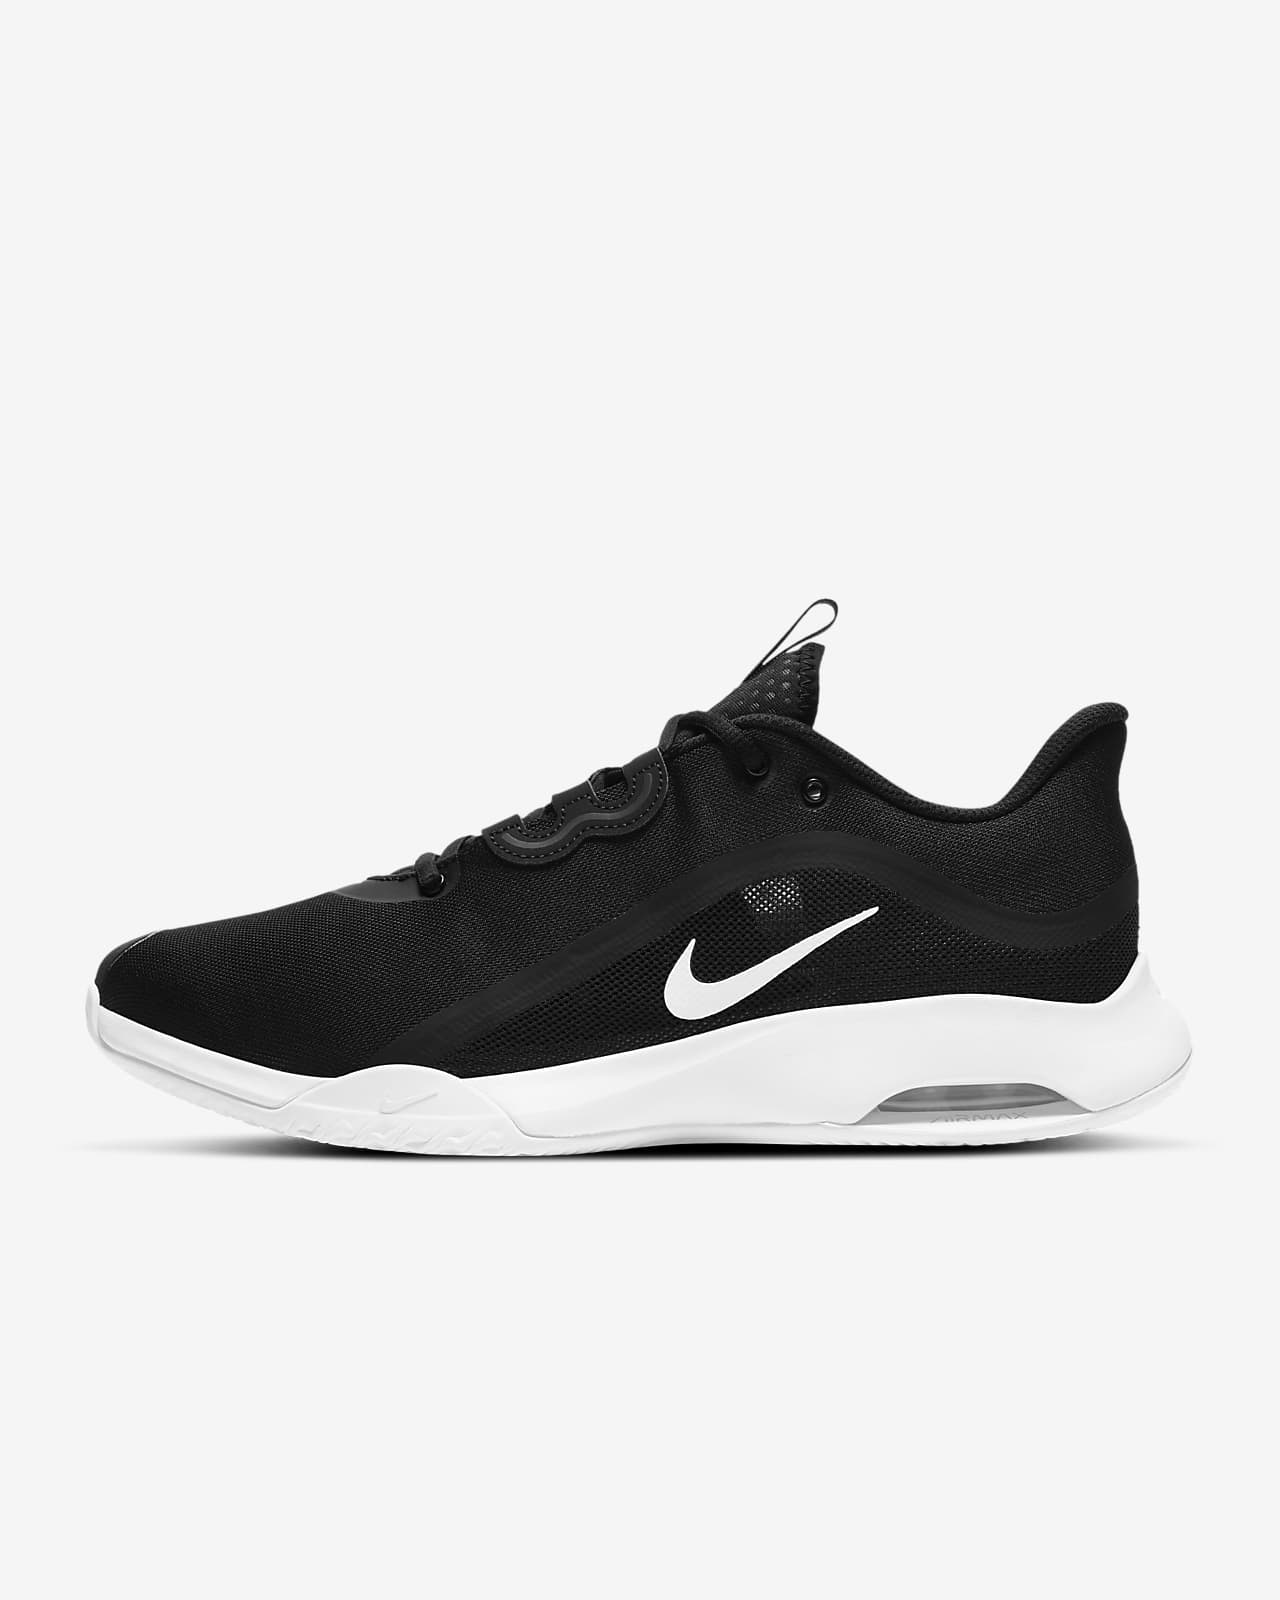 white and black nike volleyball shoes